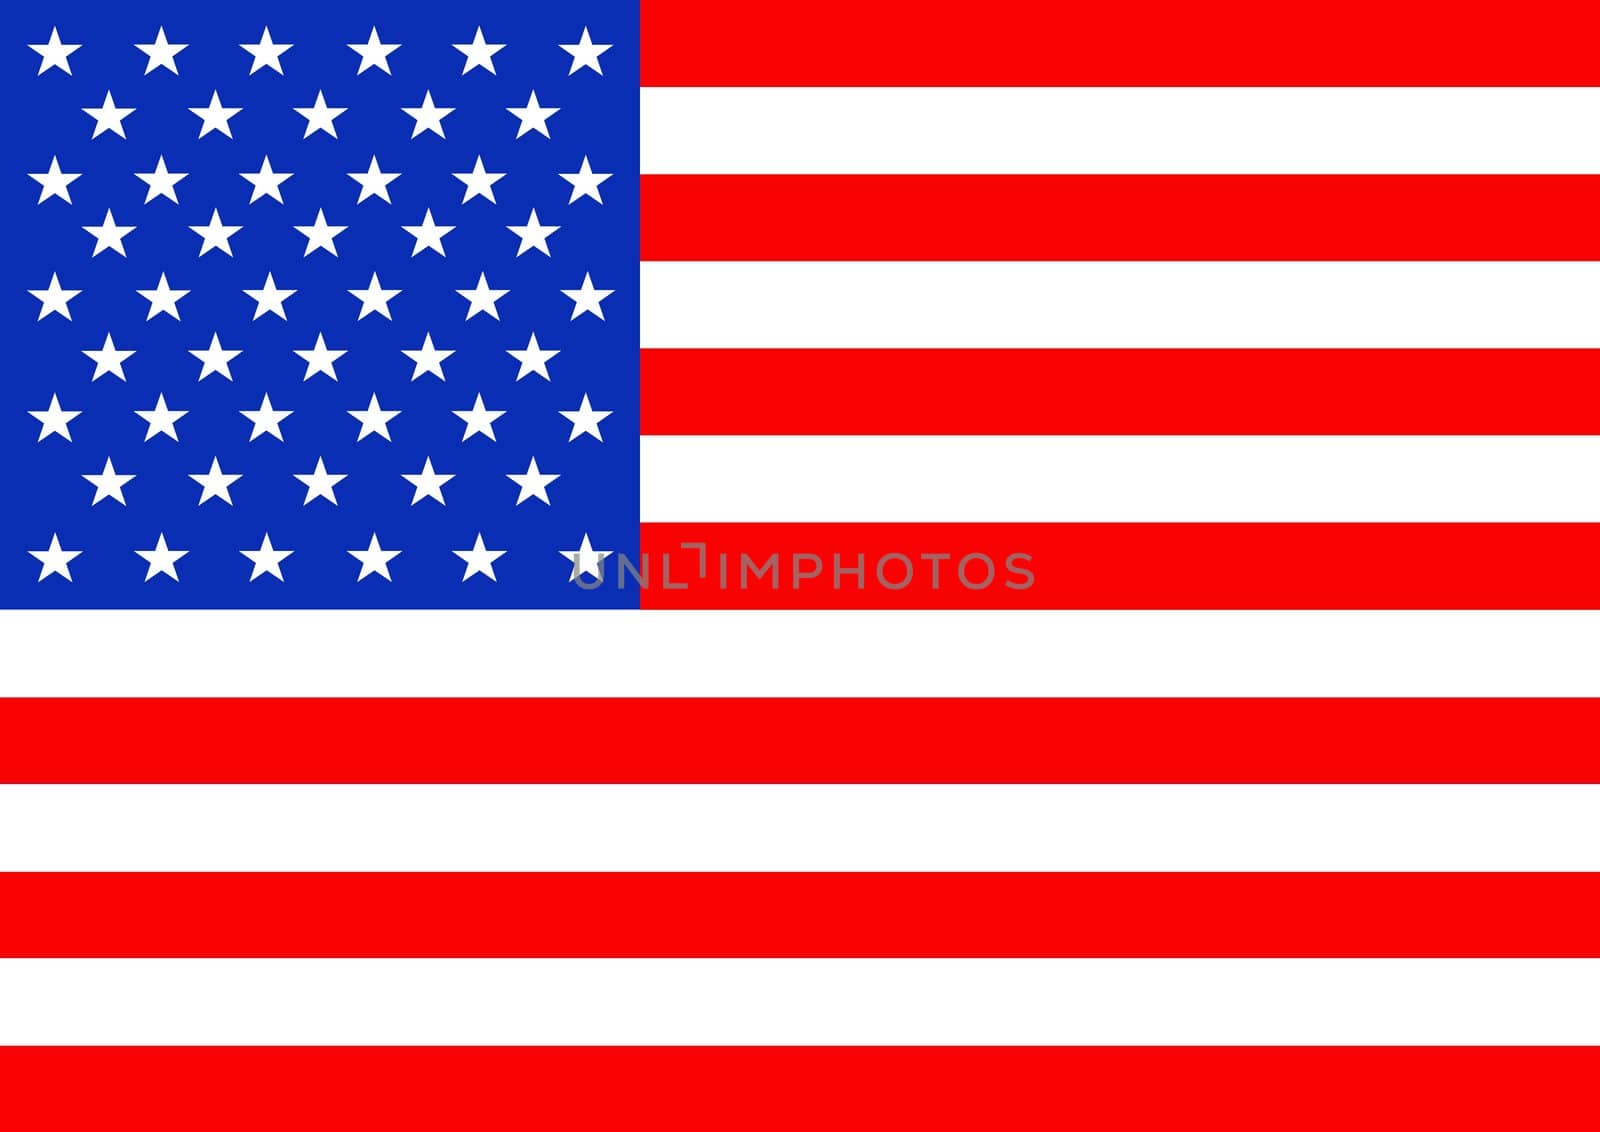 Illustrated flag of the United states of America